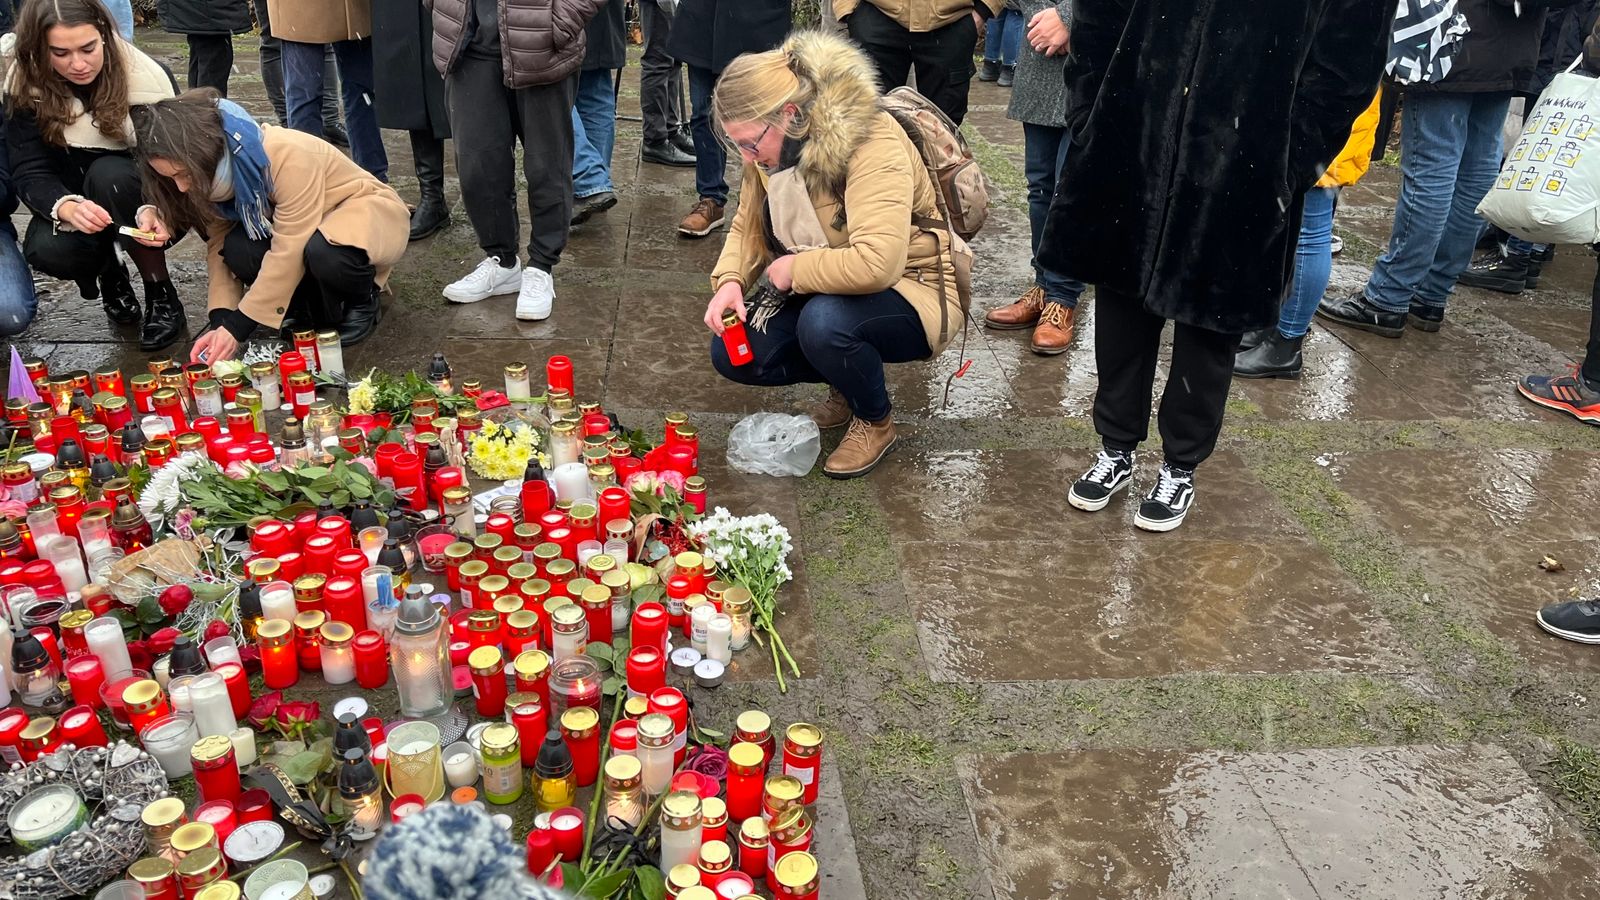 Prague in mourning after deadly mass shooting - but survivor says city 'will stand strong'